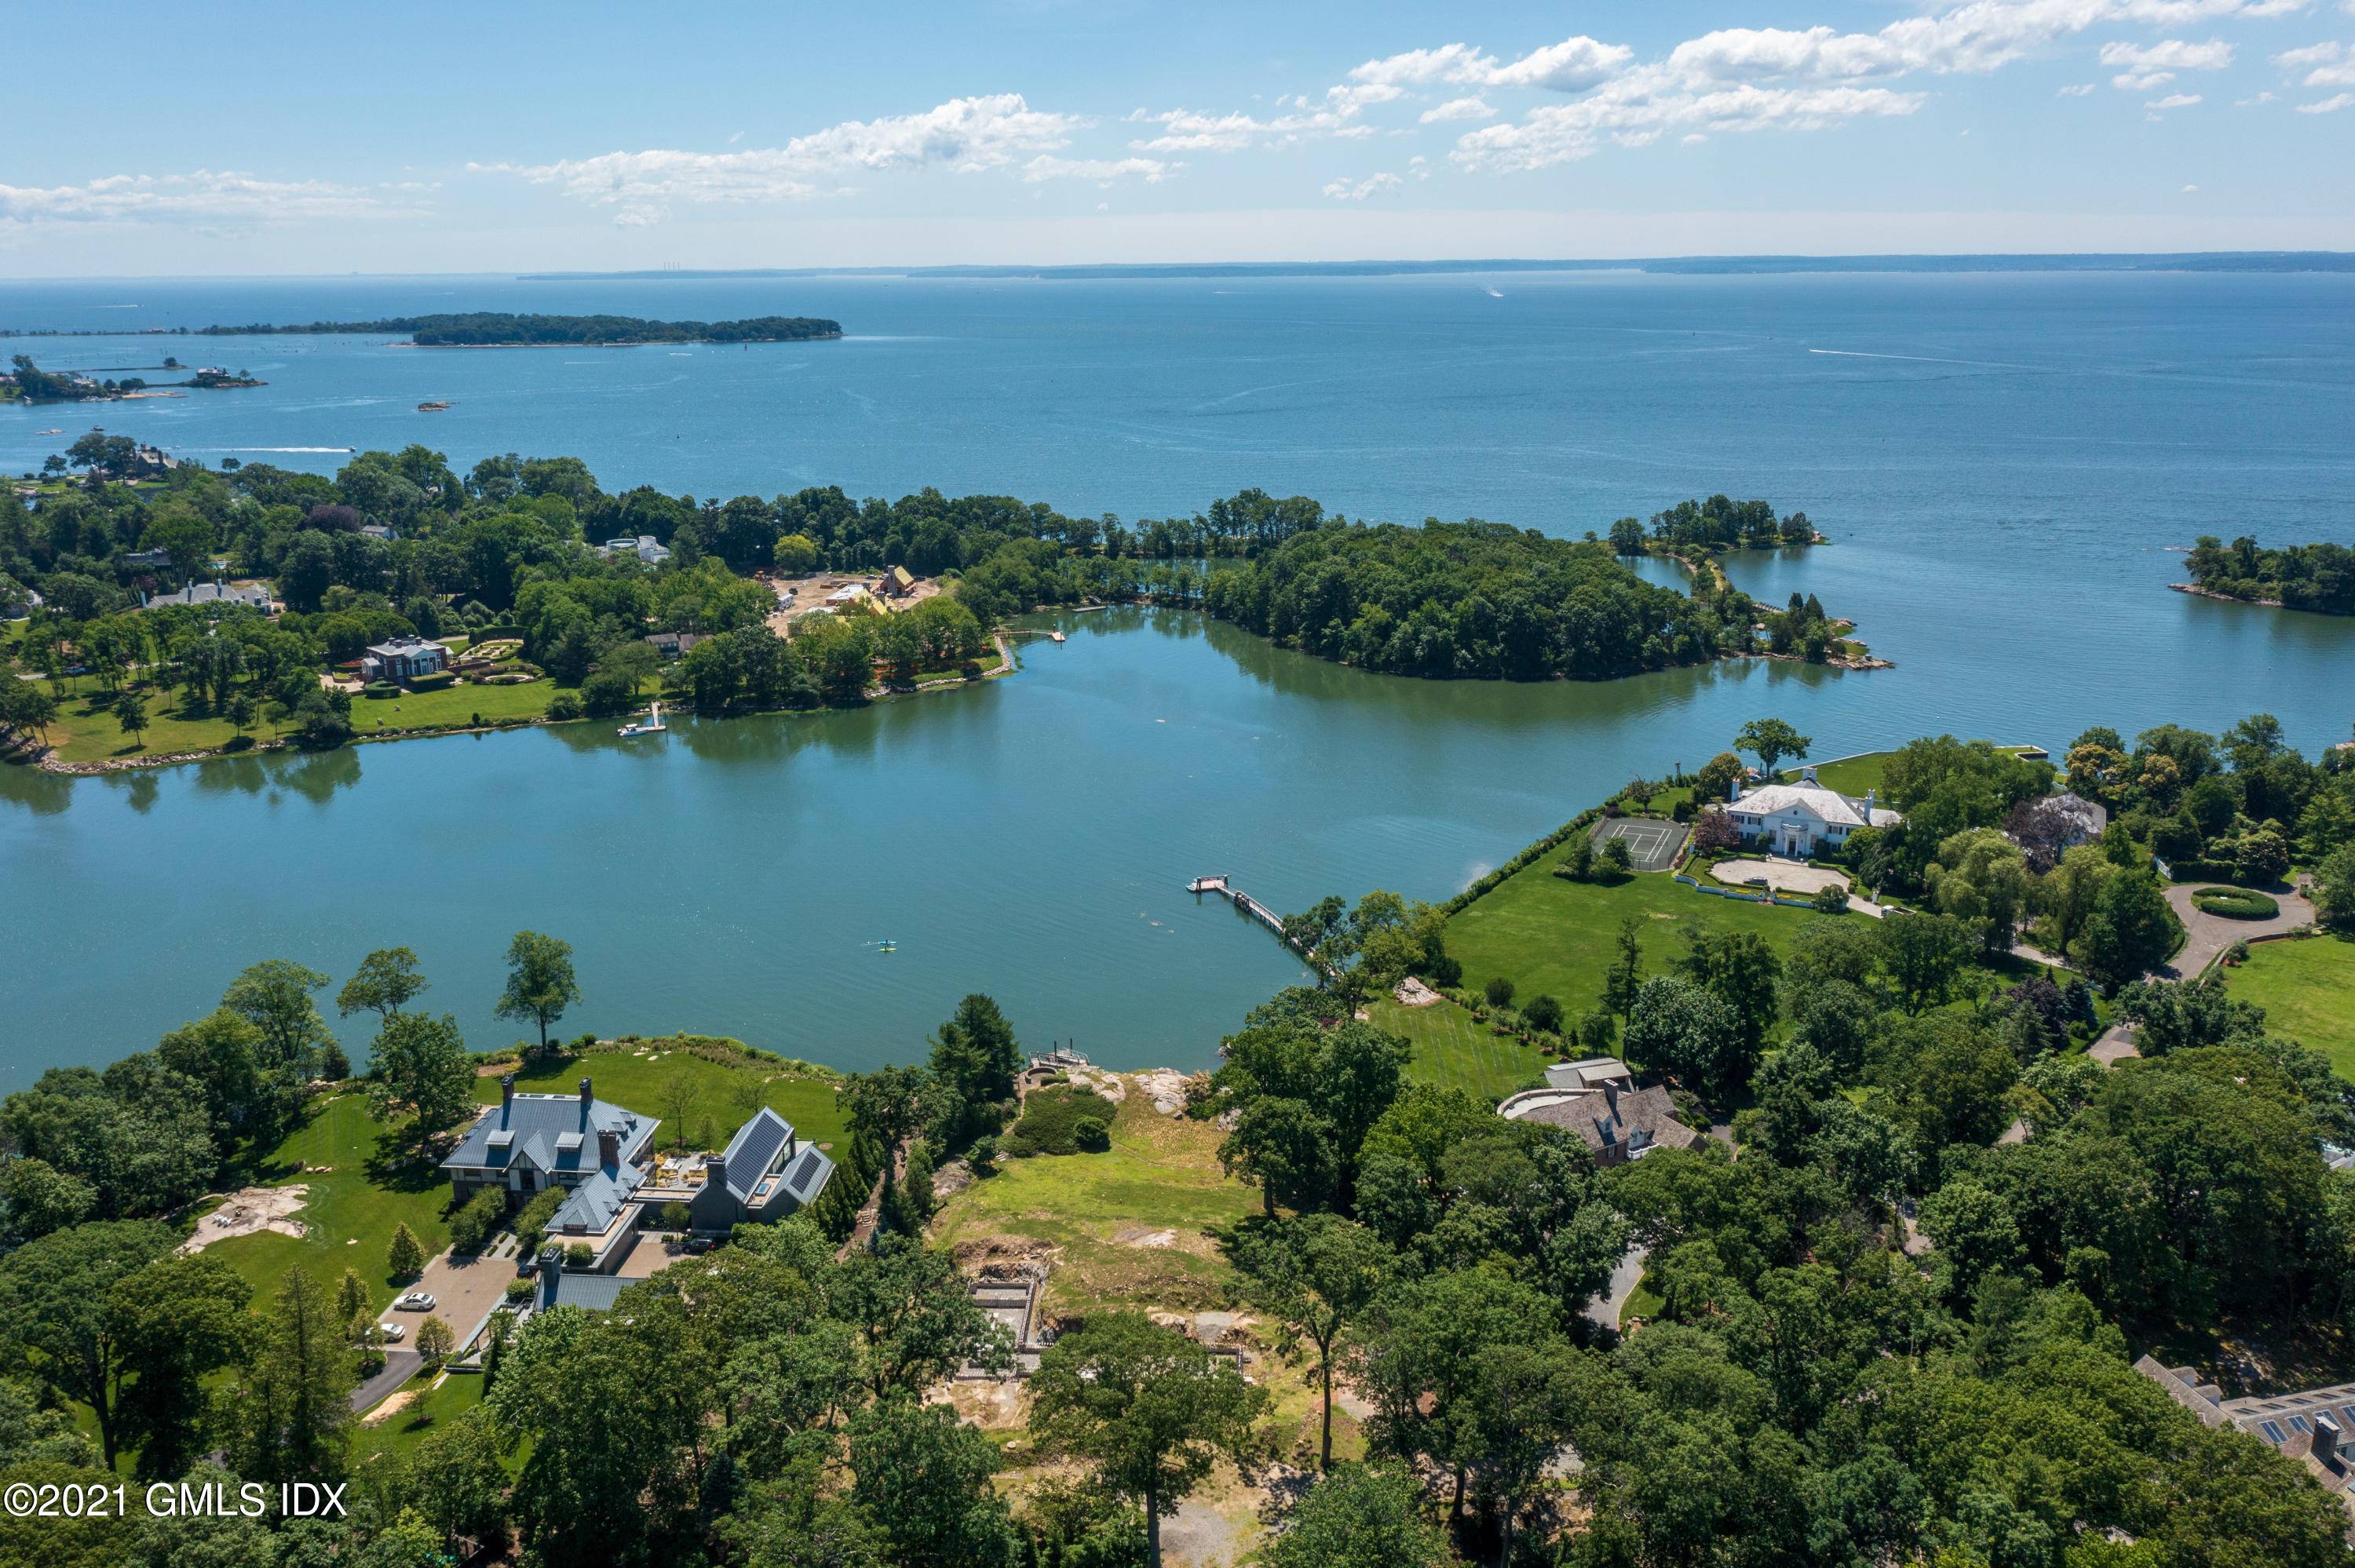 Idyllic 3 acre waterfront lot with private dock captures spectacular views from a promontory overlooking Indian Harbor.